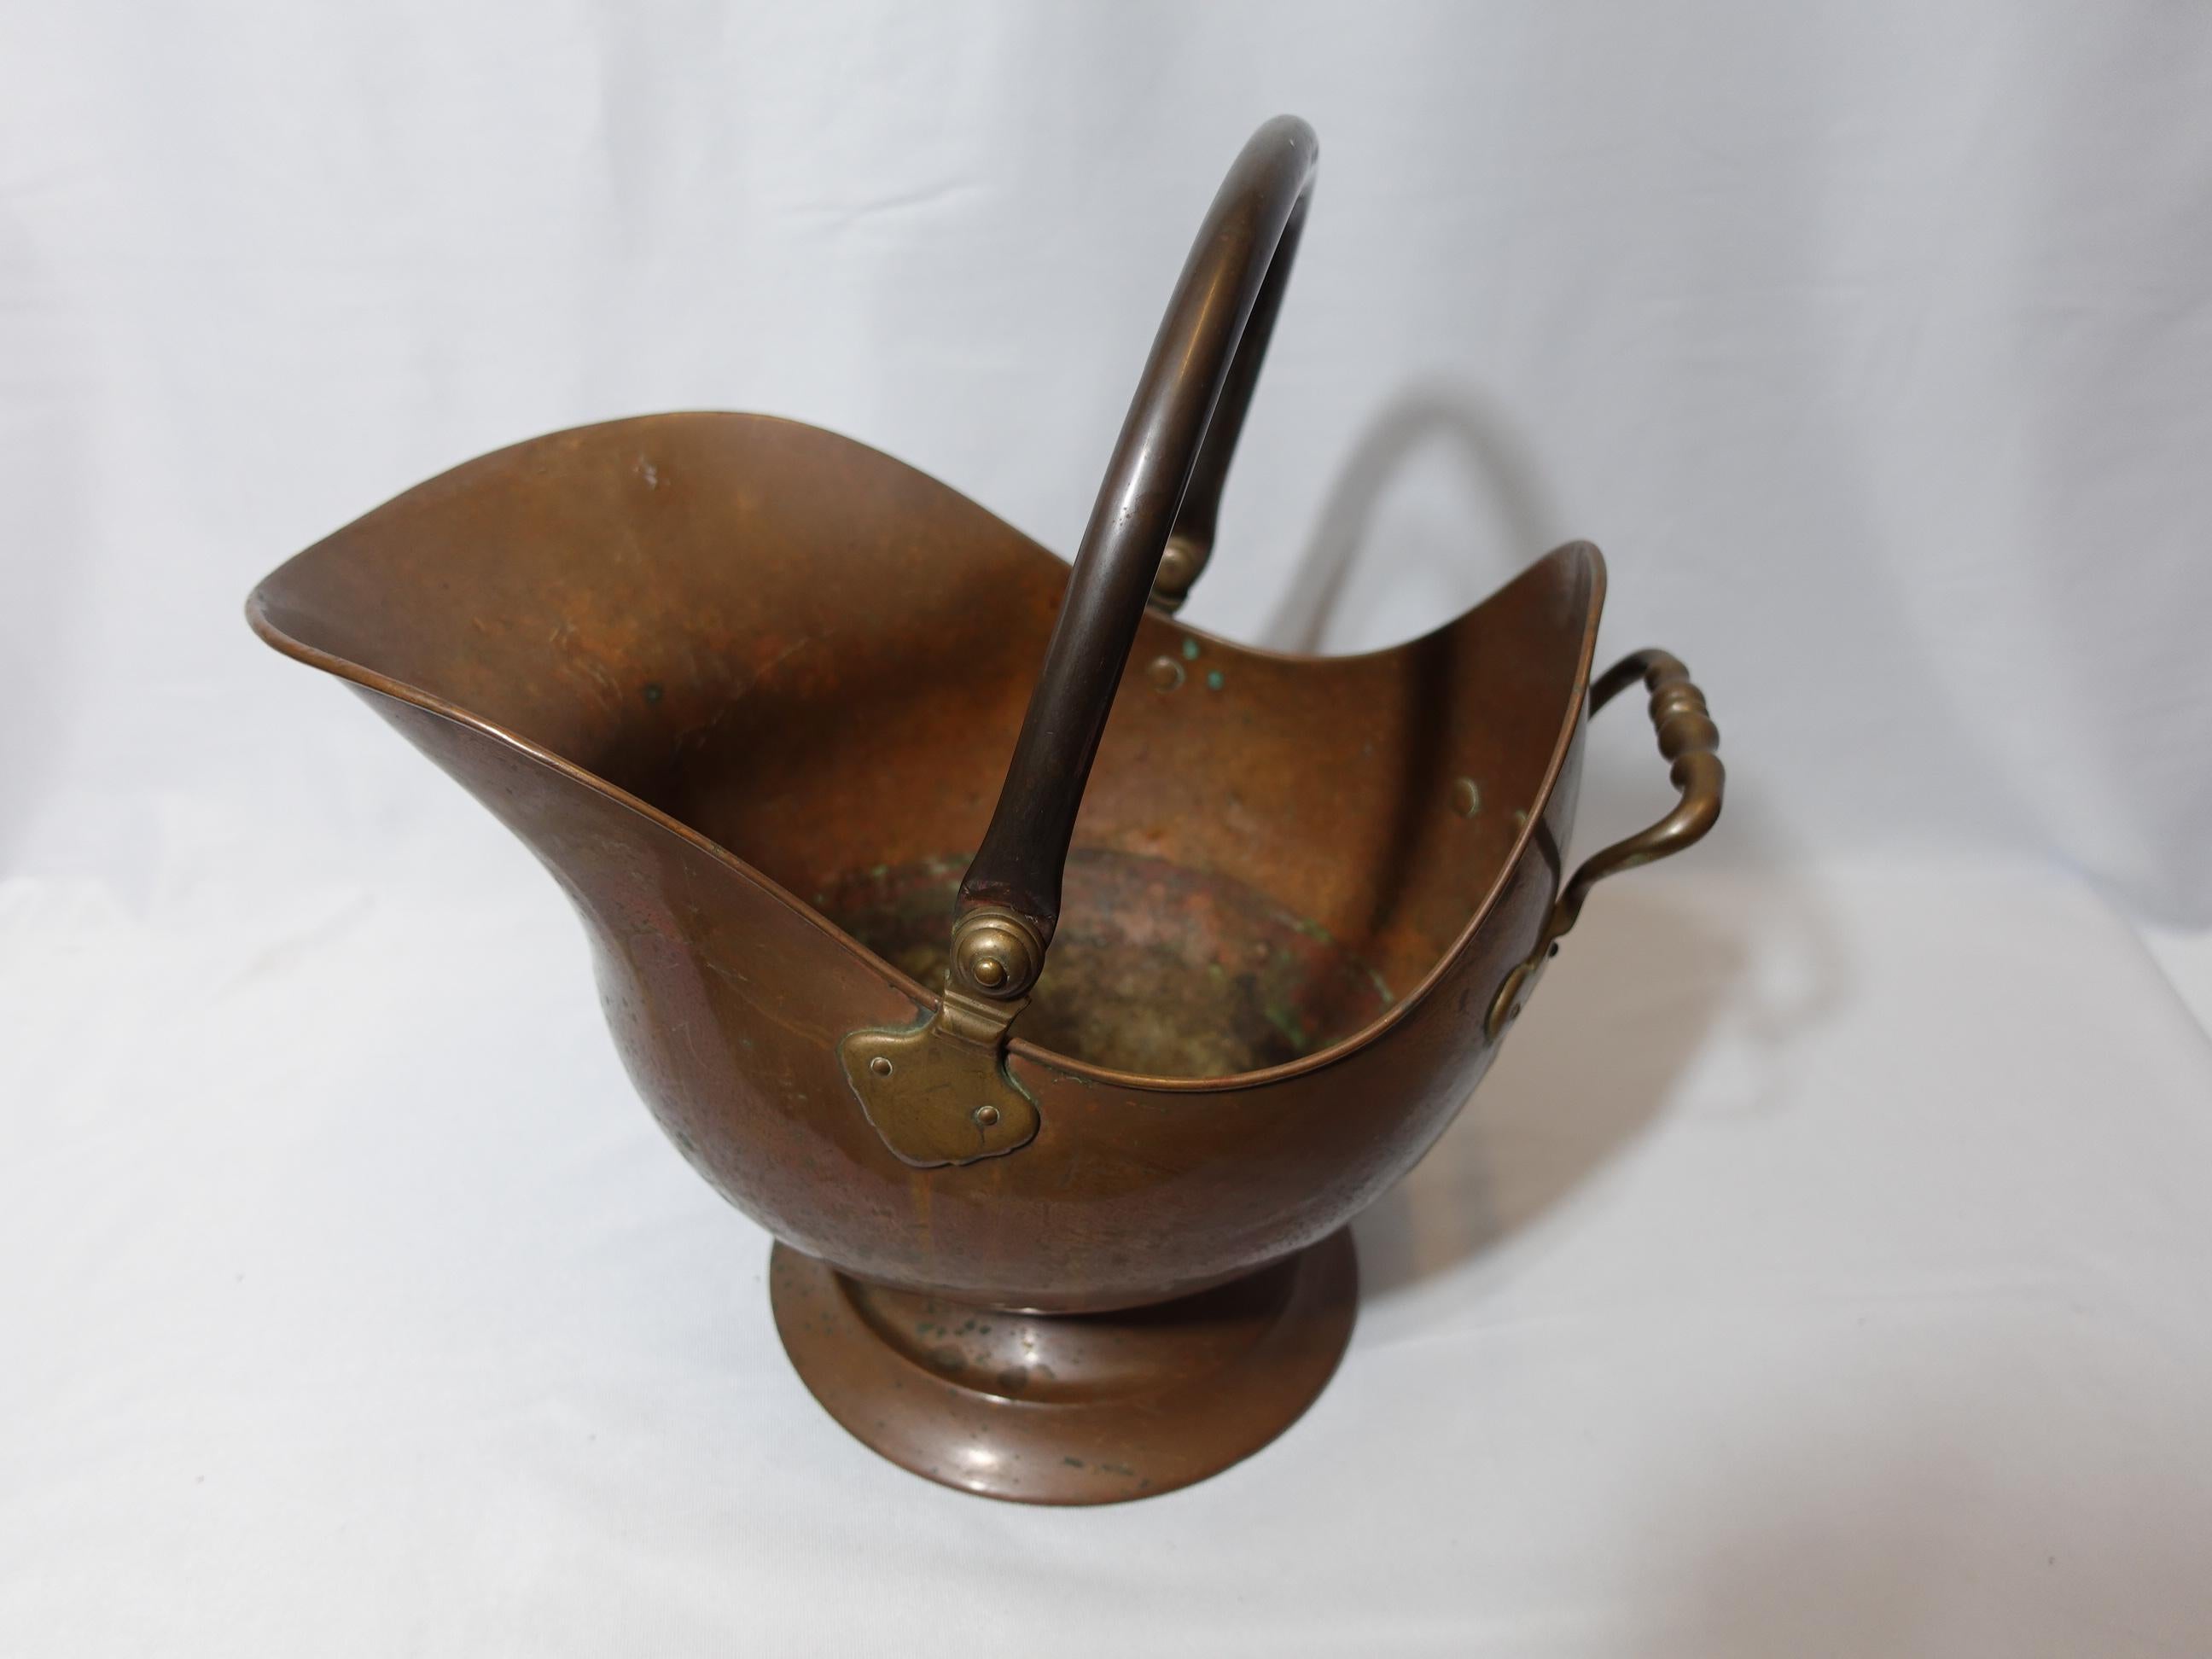 Antique Large Hand Hammered copper coal scuttles with handles on top. CO#009.
It's an old piece from the 19th century
